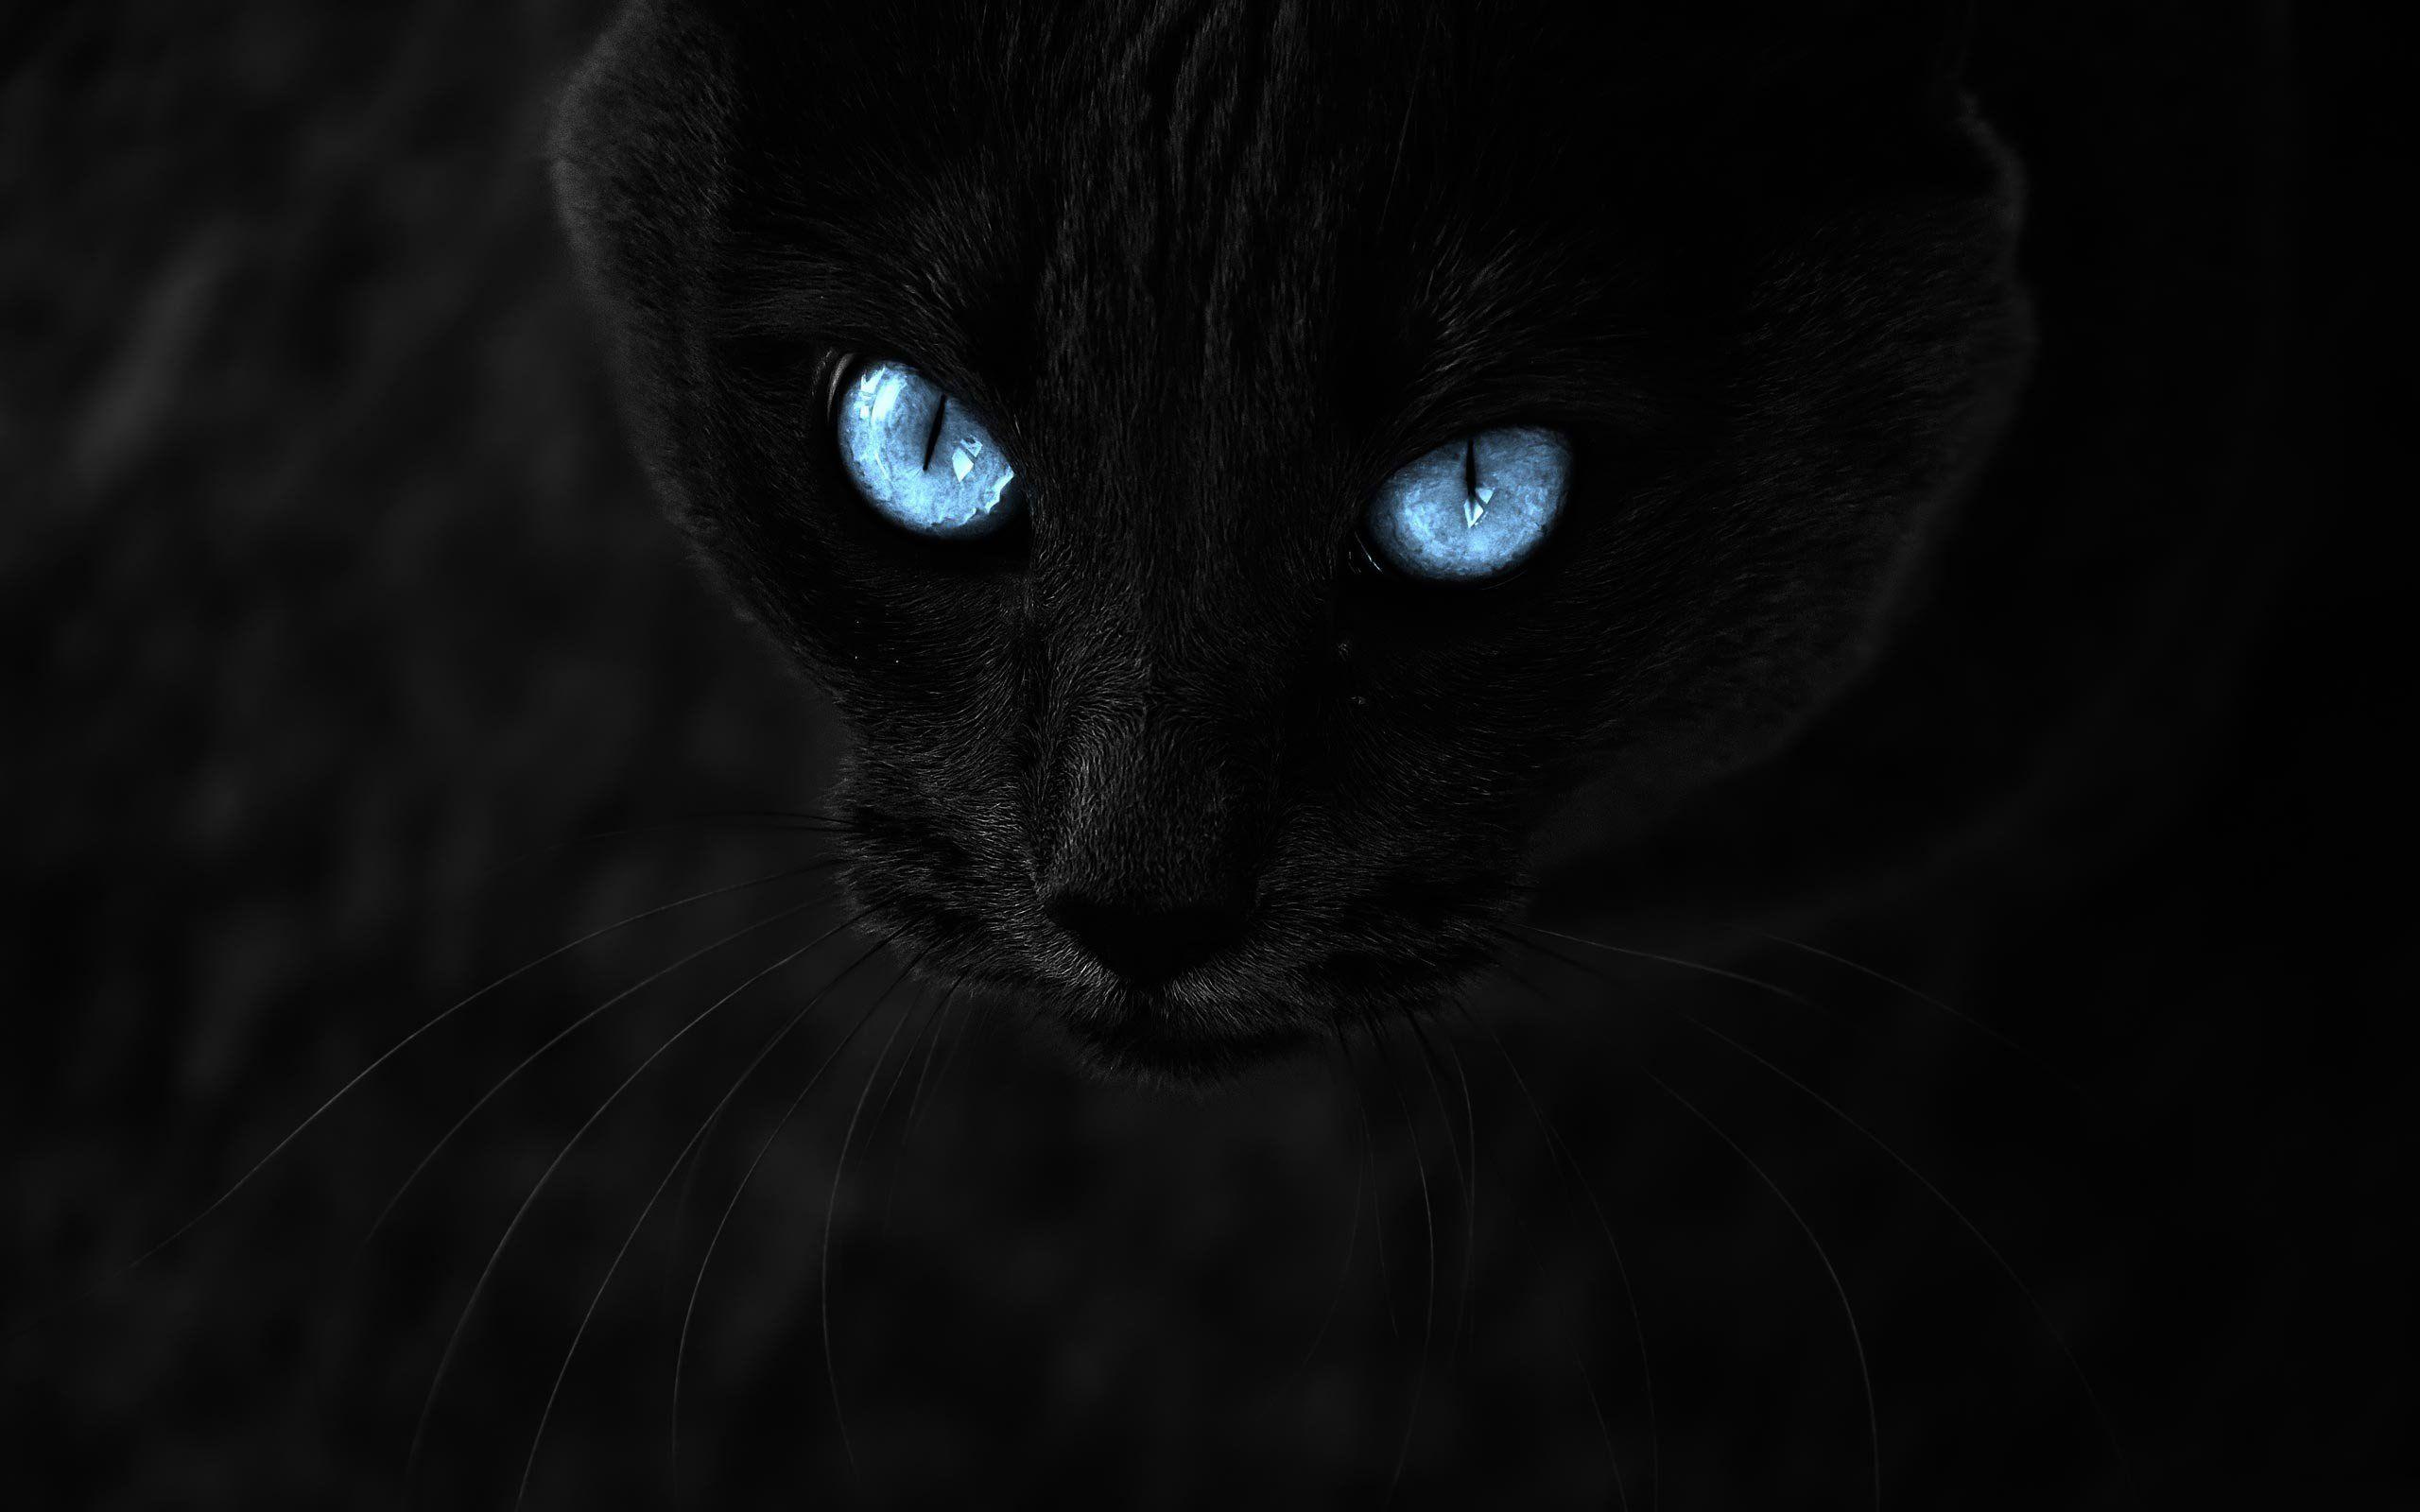 Black Cat With Blue Eyes 871579